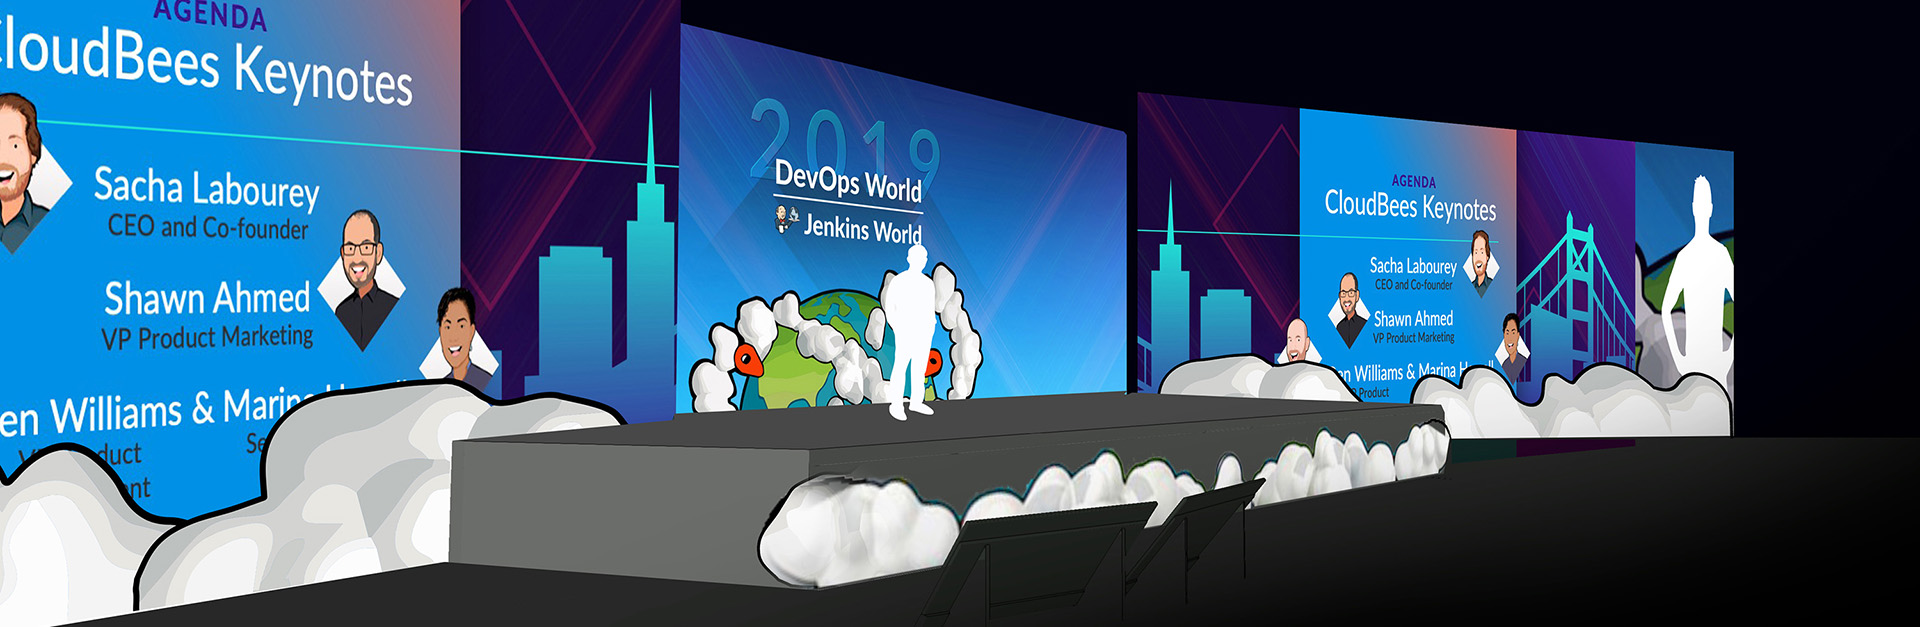 A stage mockup of the three screen set up from 2019 DevOps World Jenkins World event. The screens show the event lineup.